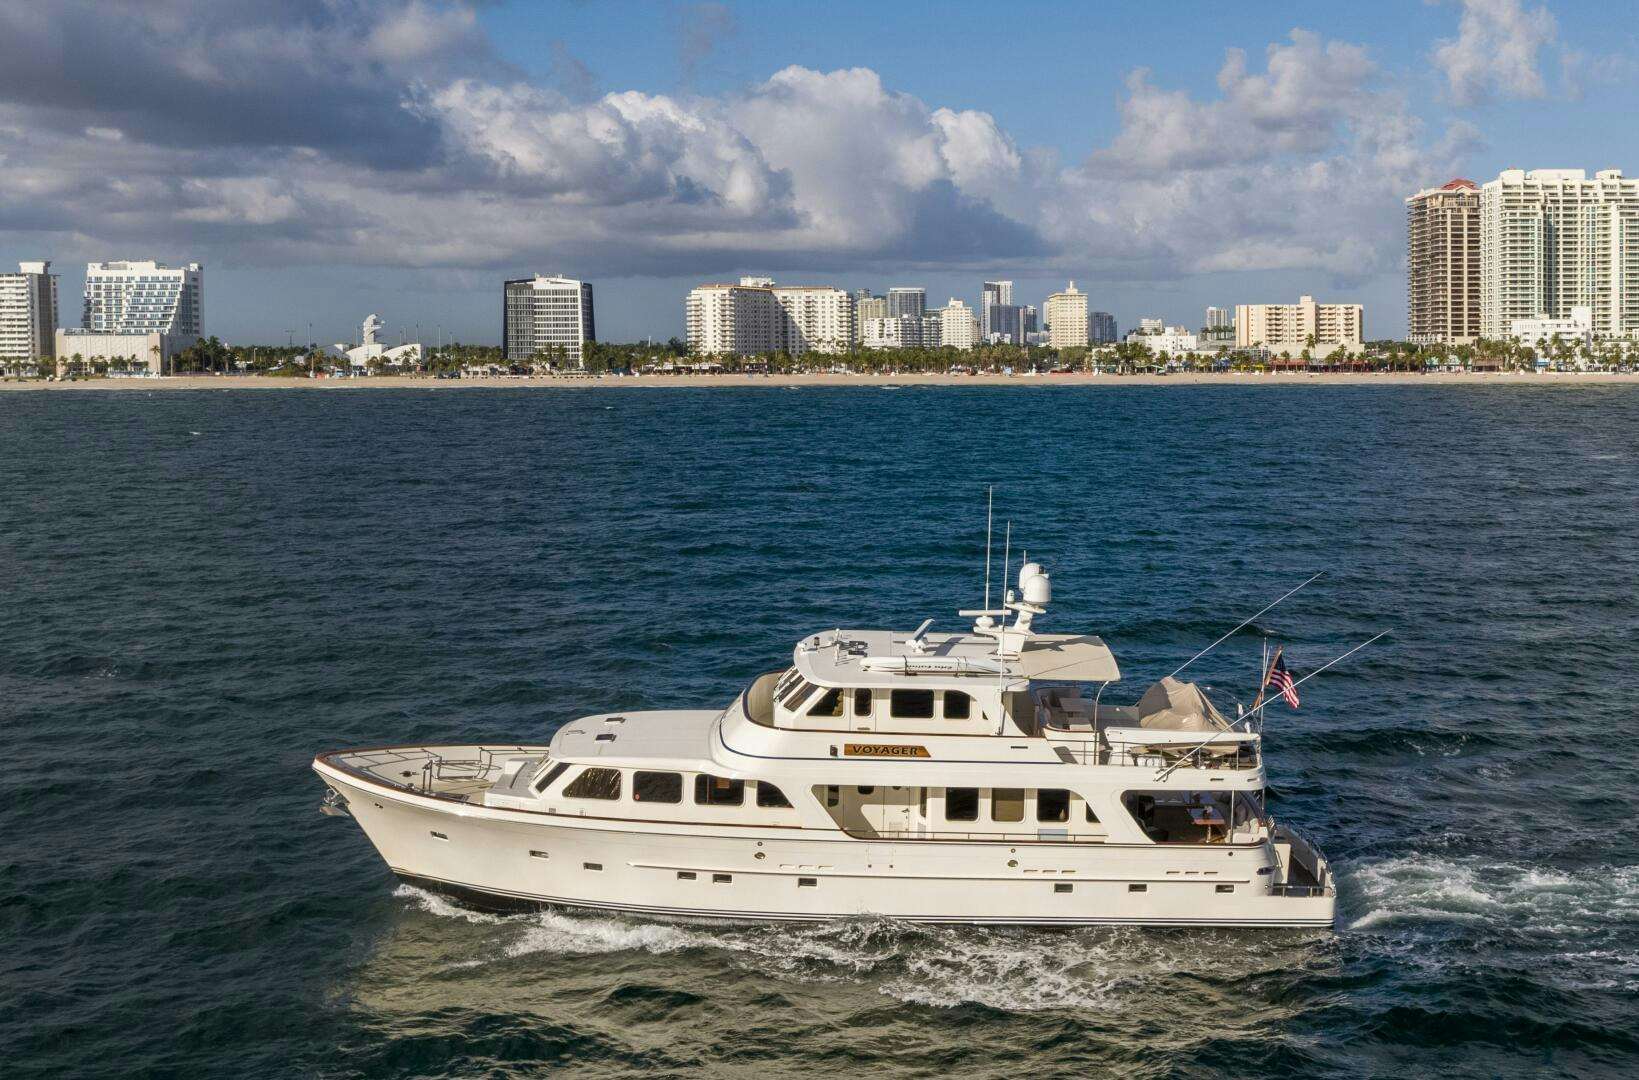 Voyager
Yacht for Sale